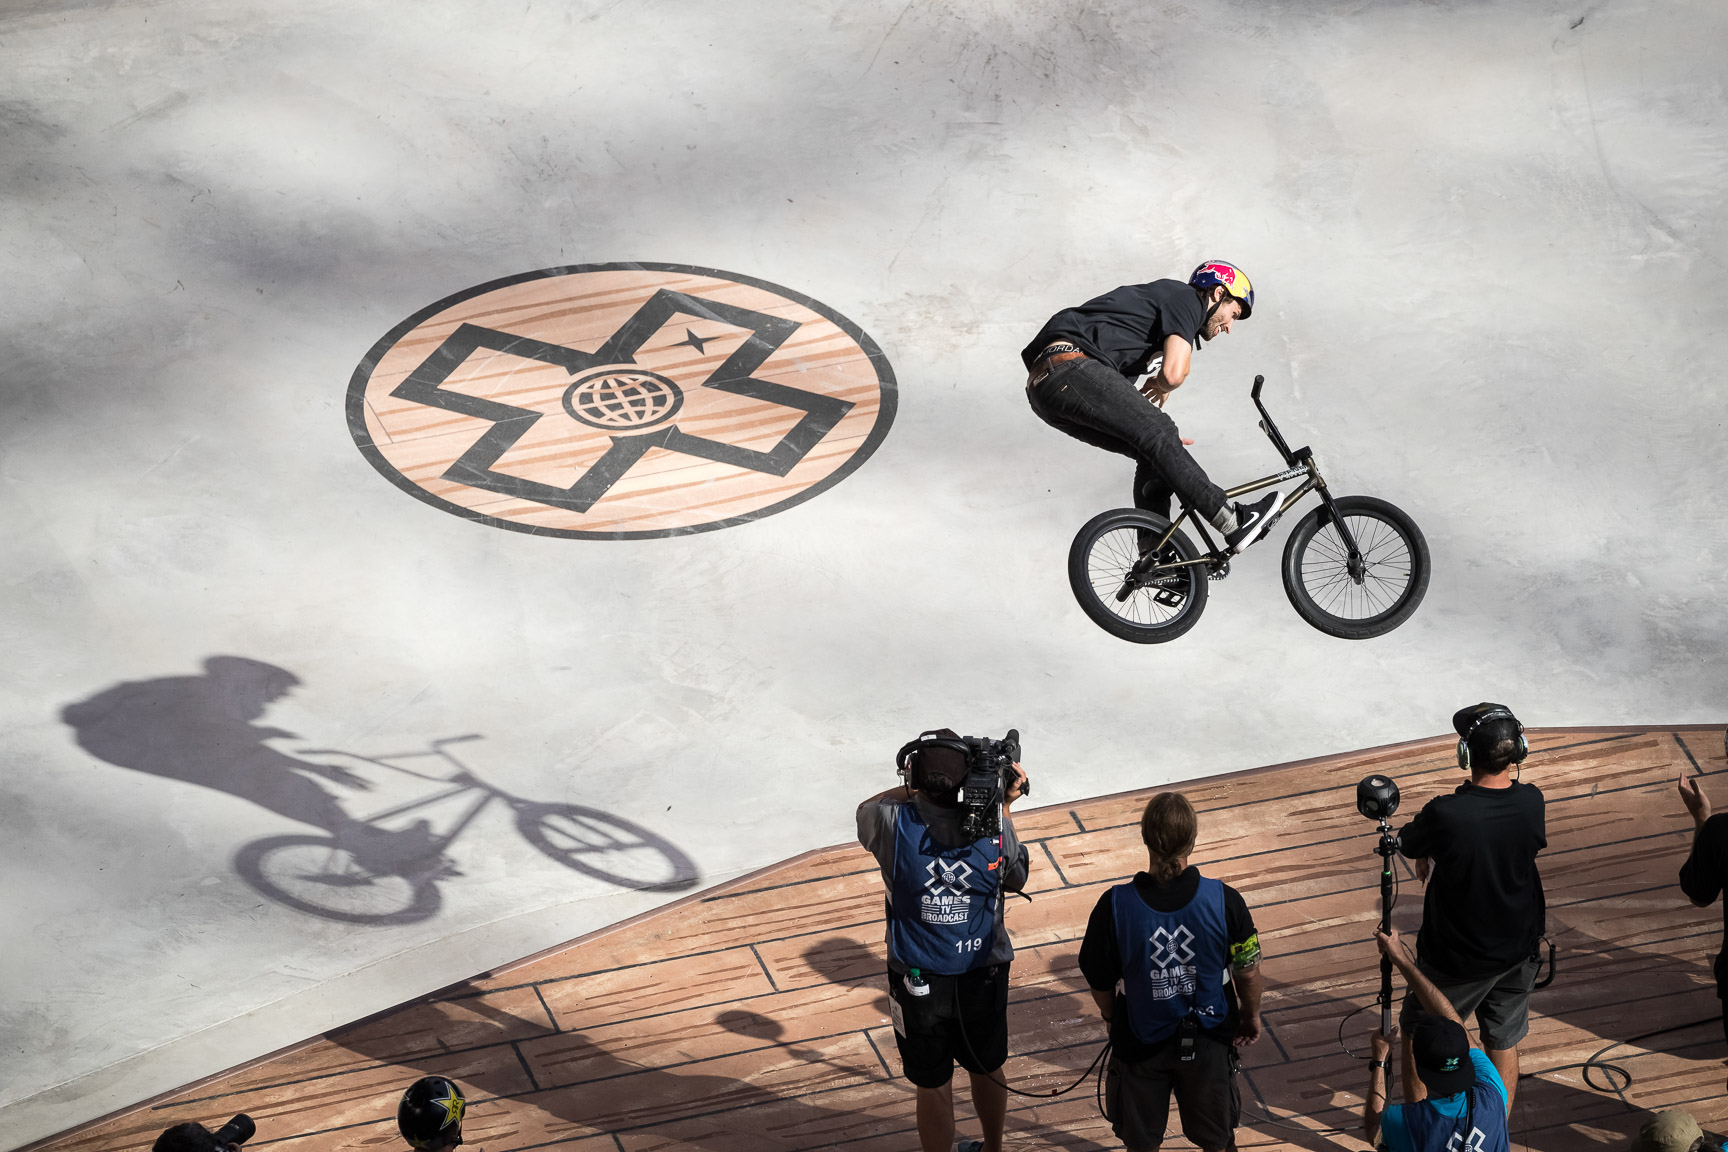 At X Games Austin 2016, Garrett Reynolds defeated the competition by his biggest win margin yet. But BMX Street is a finicky beast, and a lot has changed in a year. At X Games Minneapolis on Friday, Reynolds still took home the gold, but the margin between first and second place has closed, due largely to the technical stylings of Devon Smillie and Simone Barraco.